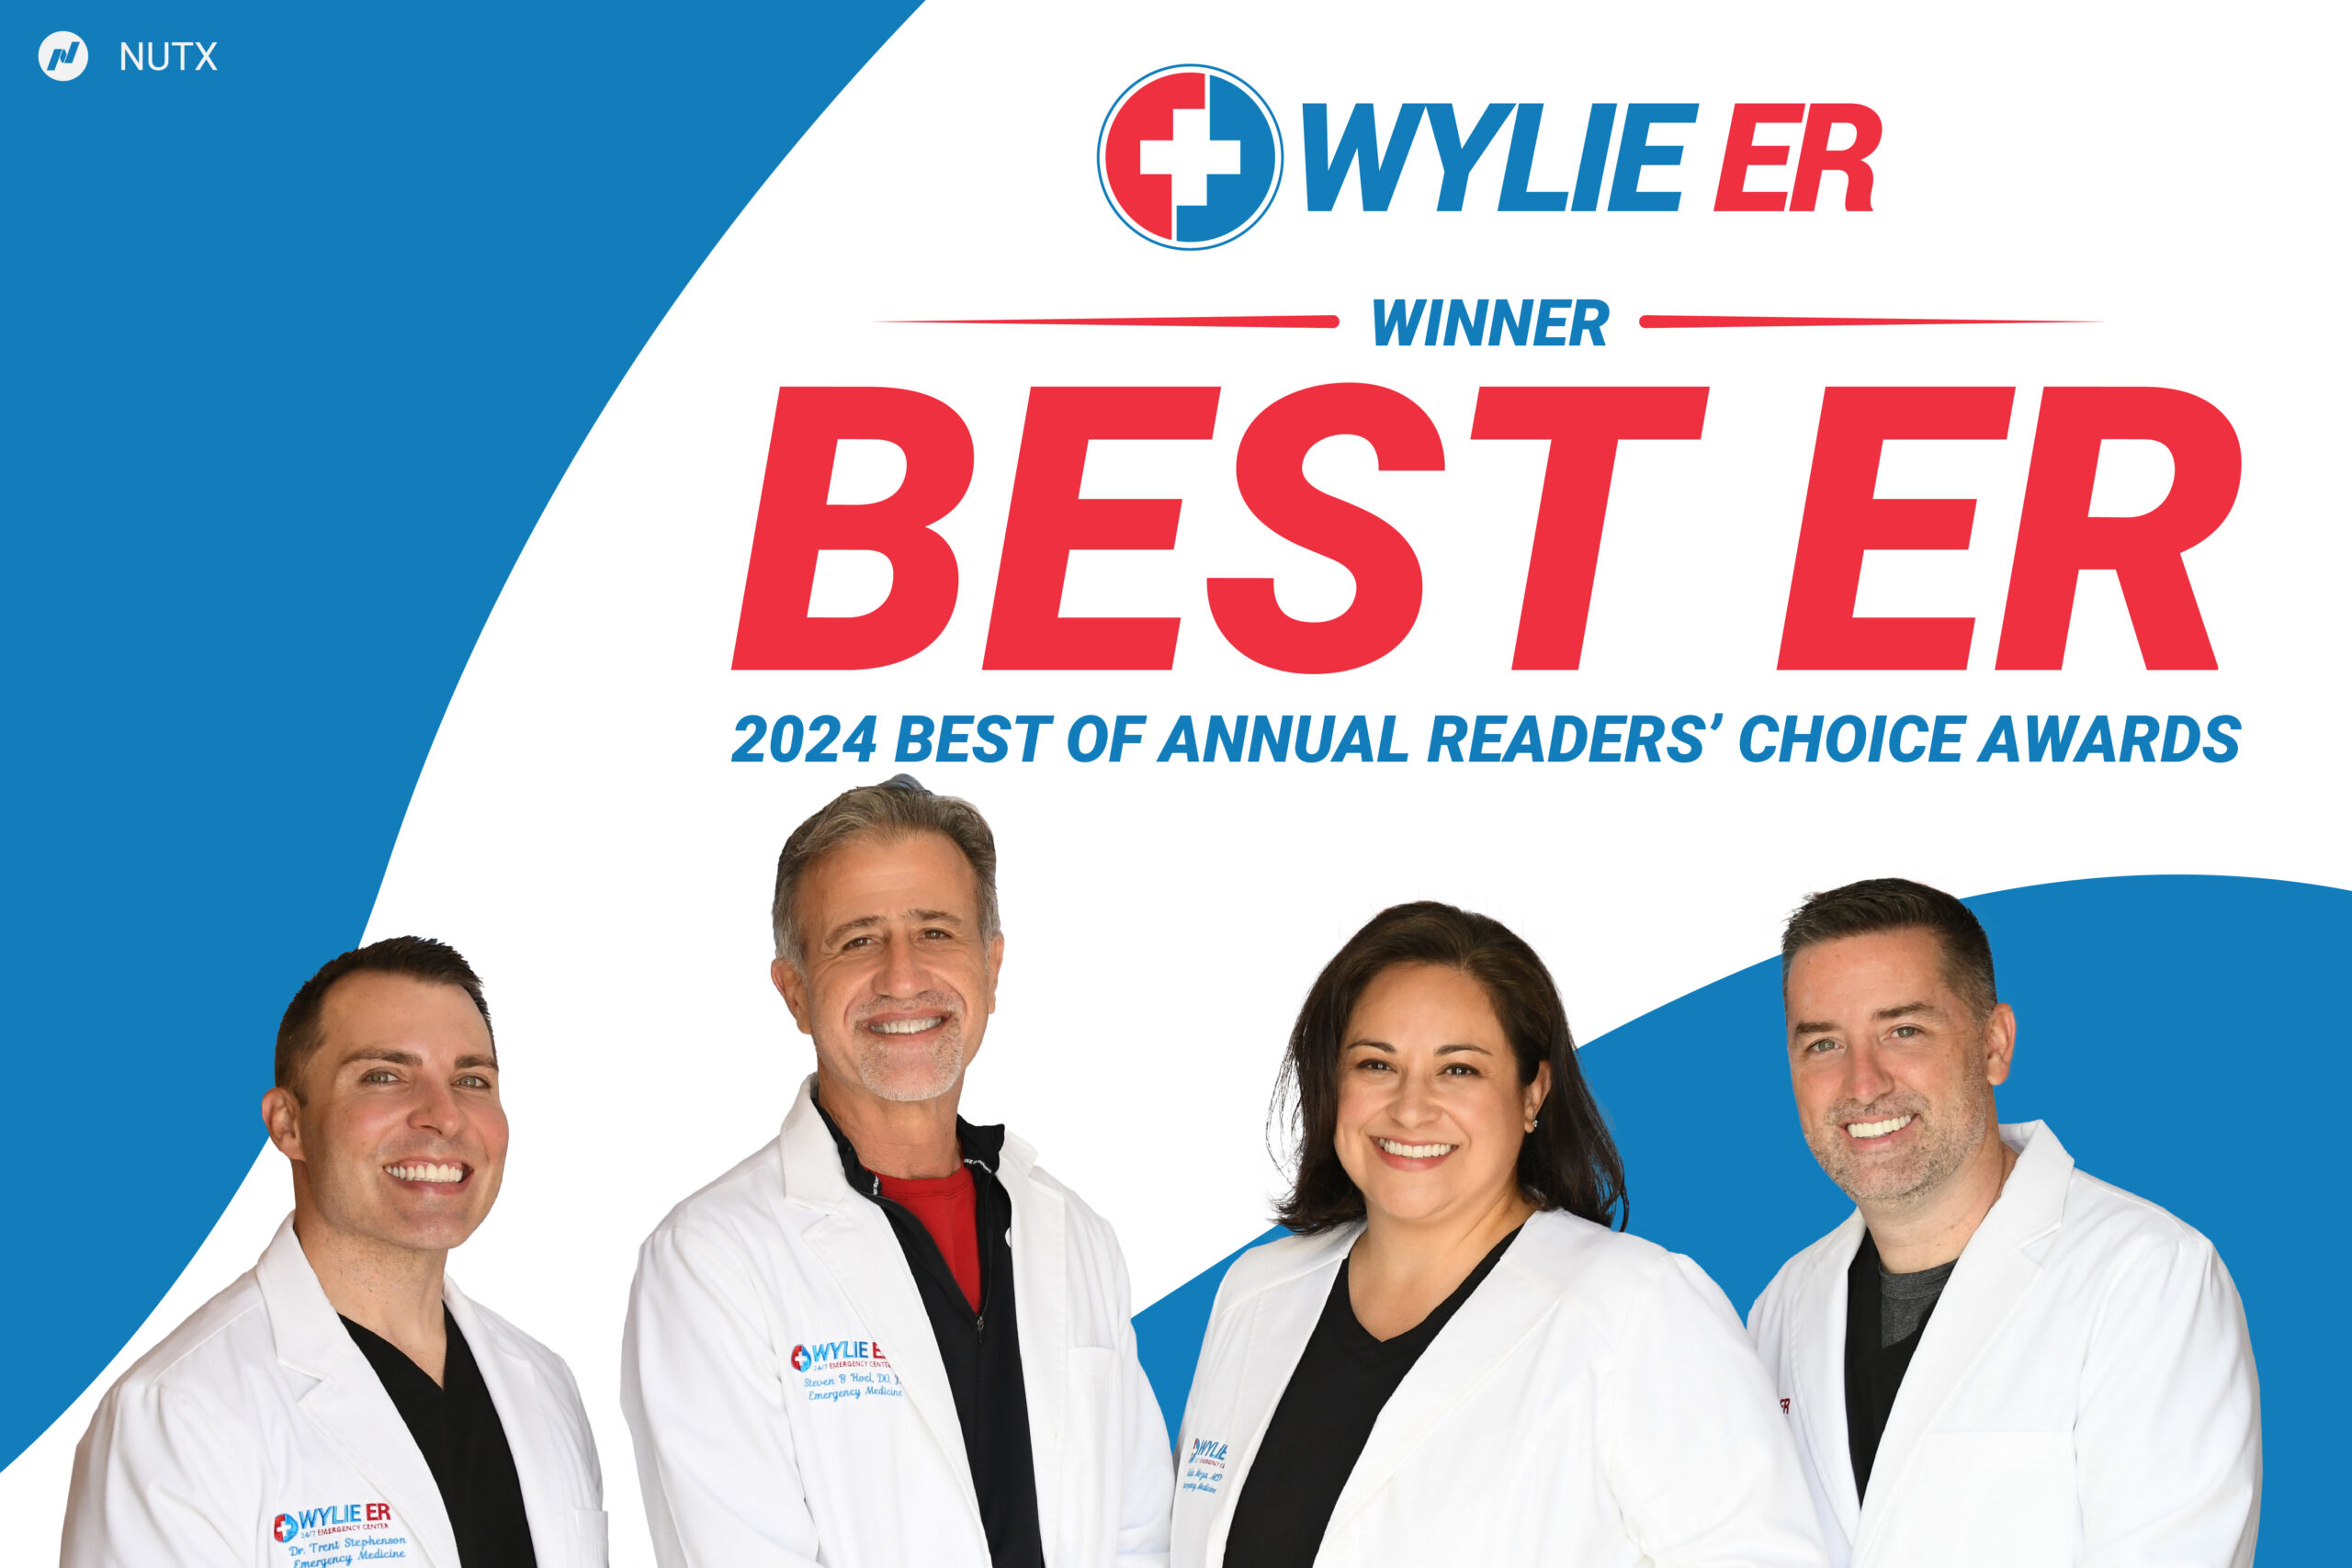 Wylie ER Named ‘Best ER’ in The Community For the Fifth year in a Row